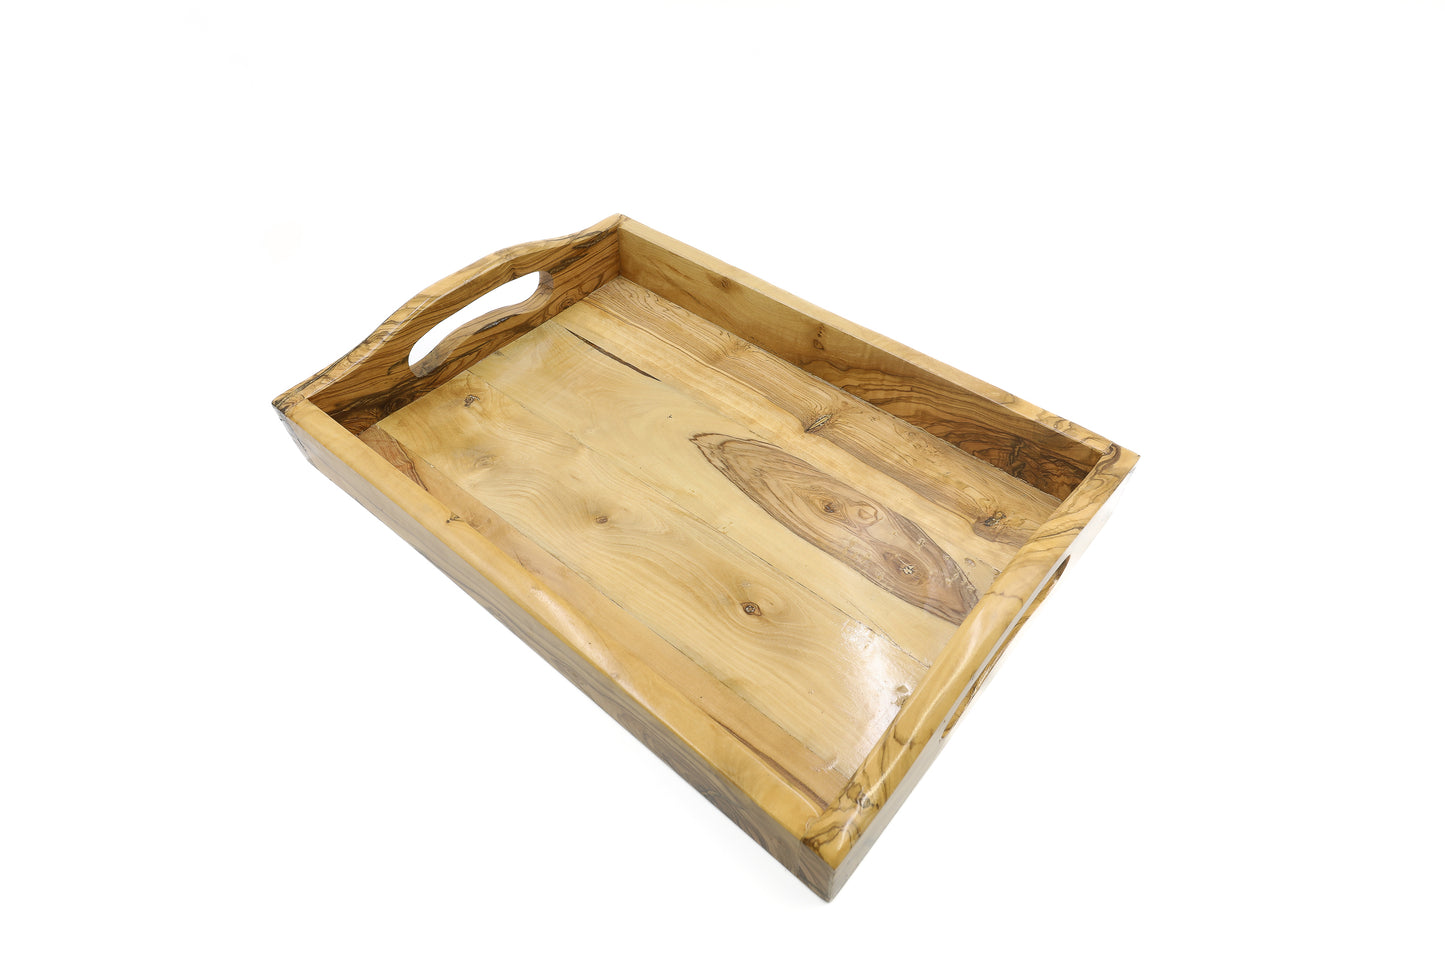 Stylish rectangular serving tray crafted from olive wood with handles